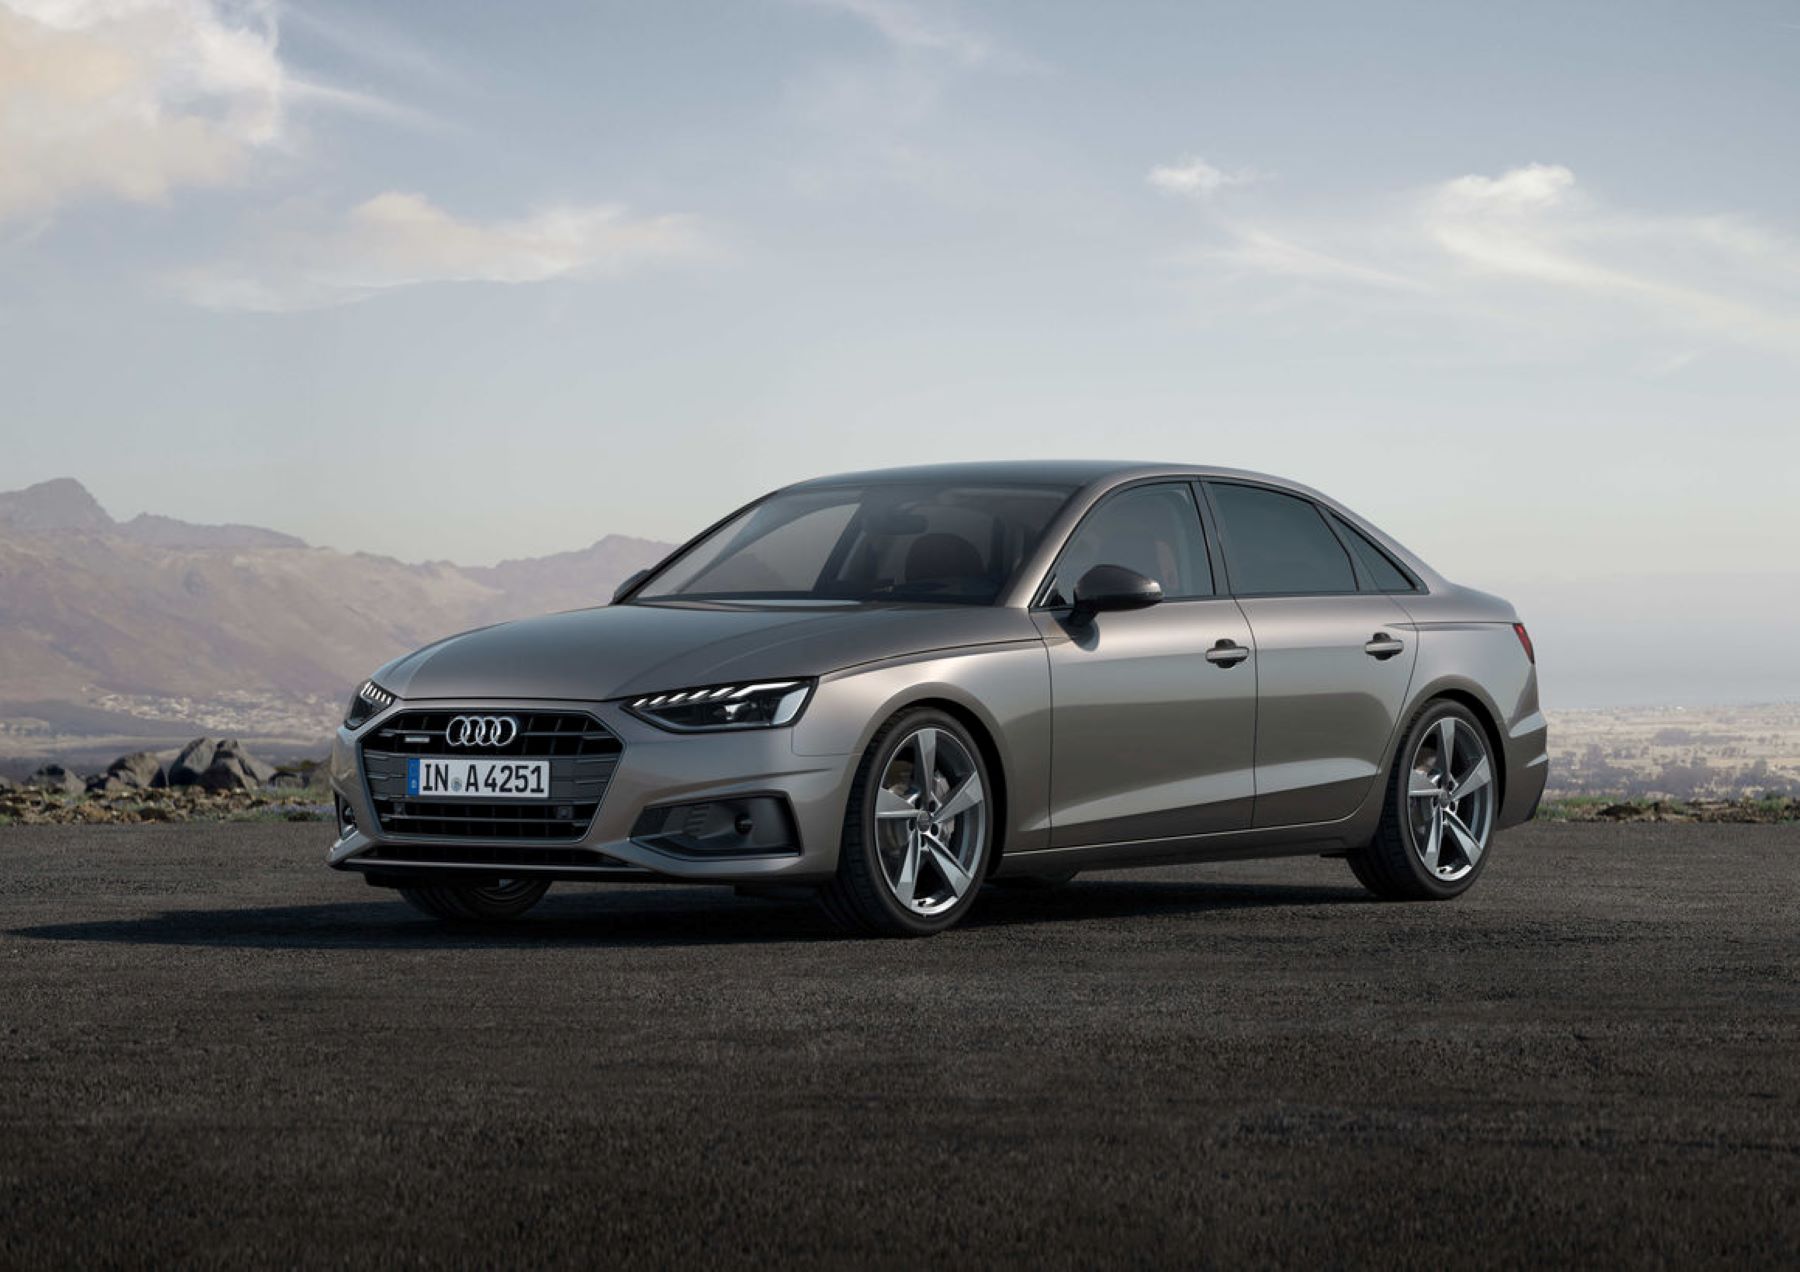 The Audi A4 Sedan luxury executive car parked on a dirt lot with mountains and fog in the background